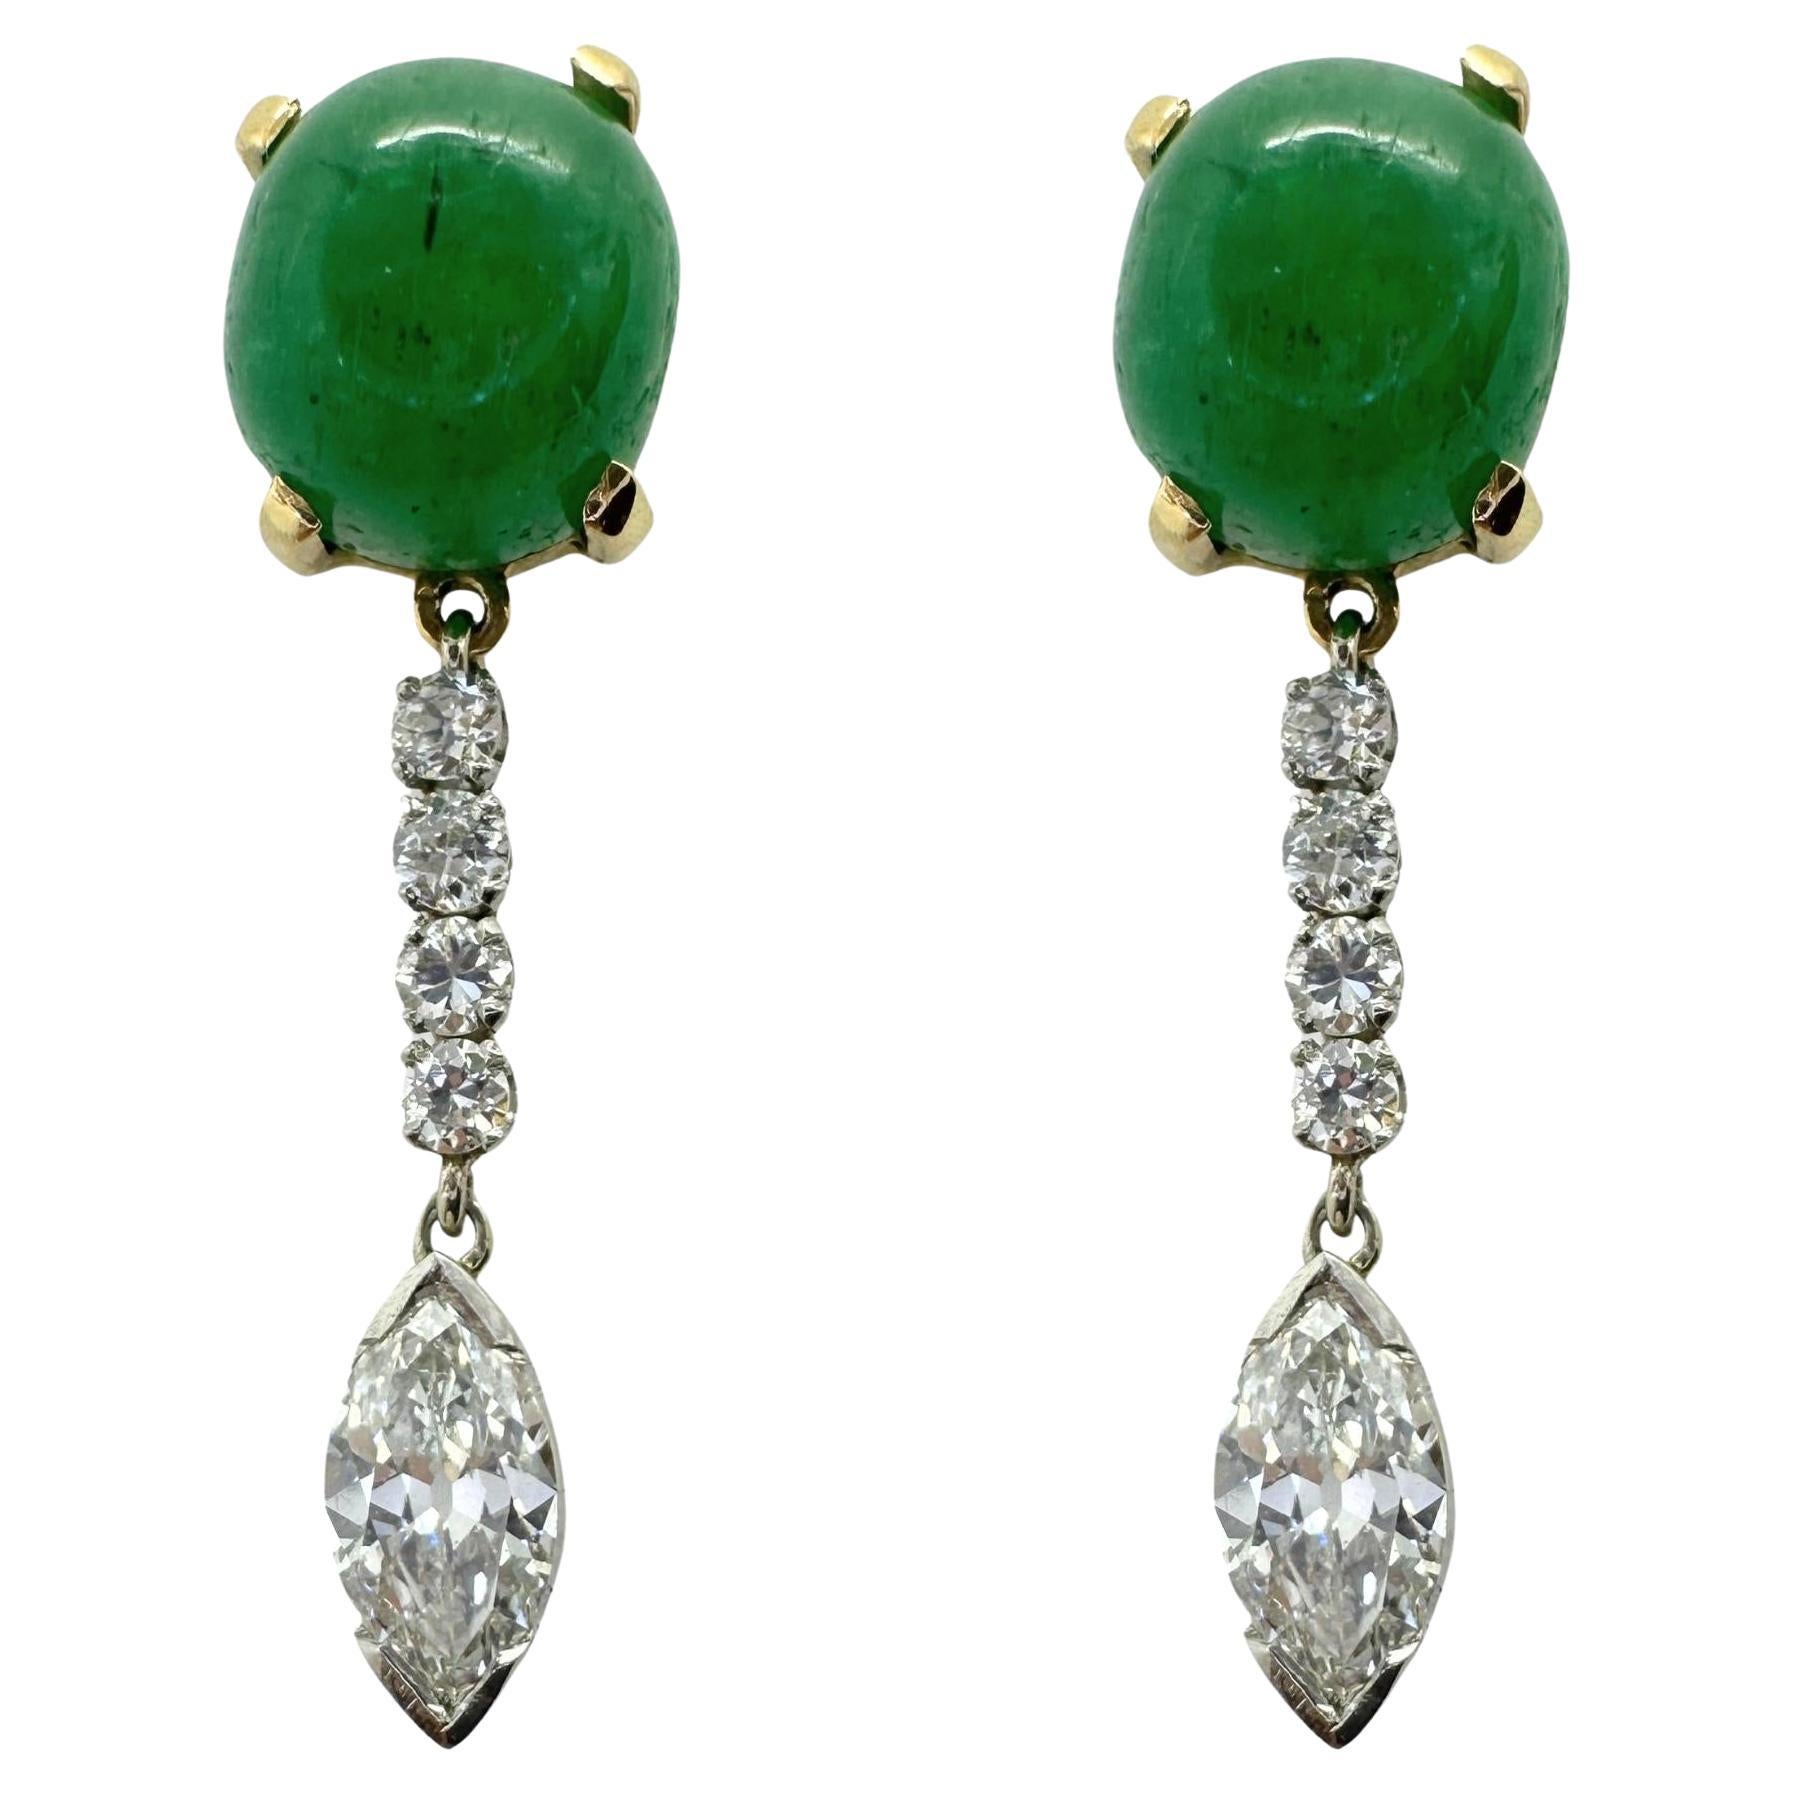 1940's Platinum and 18k Diamond and Cabochon Emerald Earrings